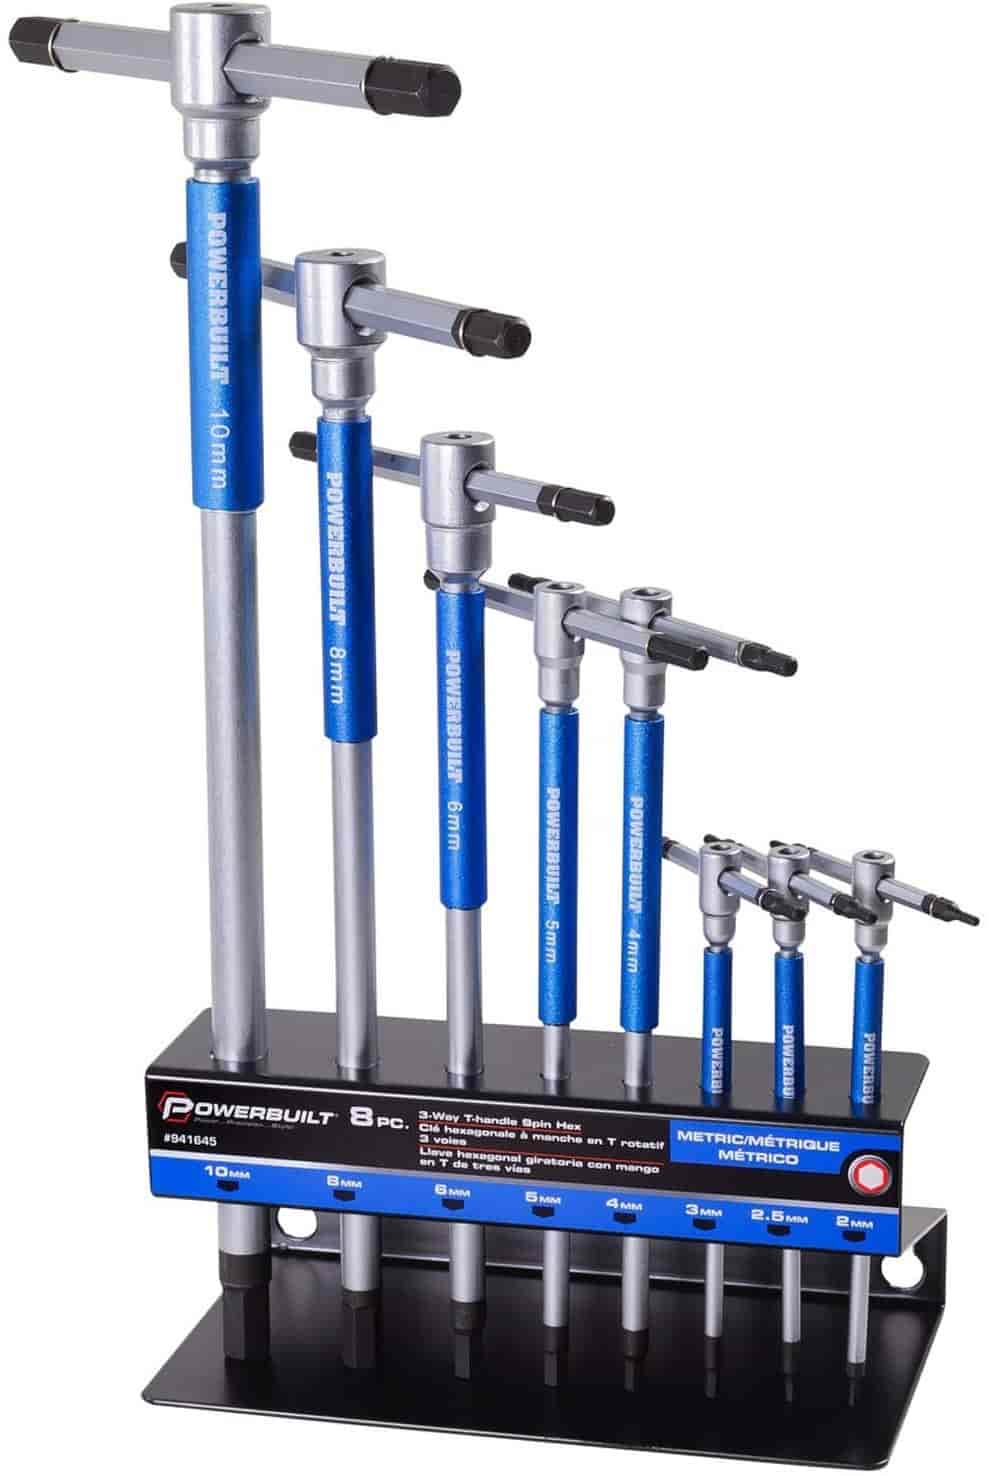 T-HANDLE WRENCH SET